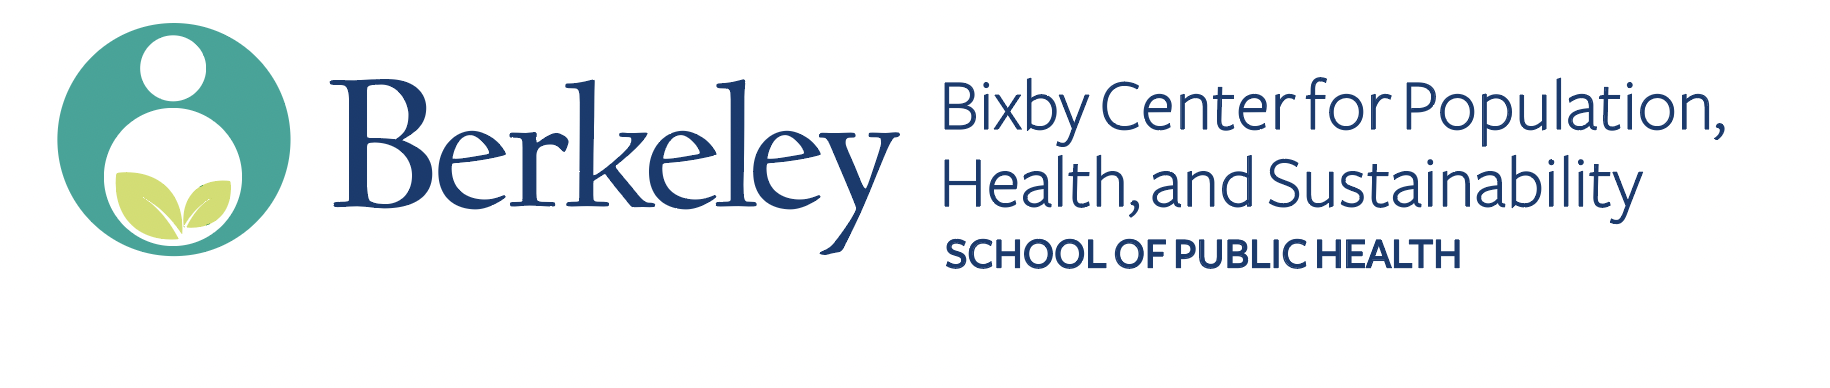 UC Berkeley Bixby Center for Population, Health, and Sustainability